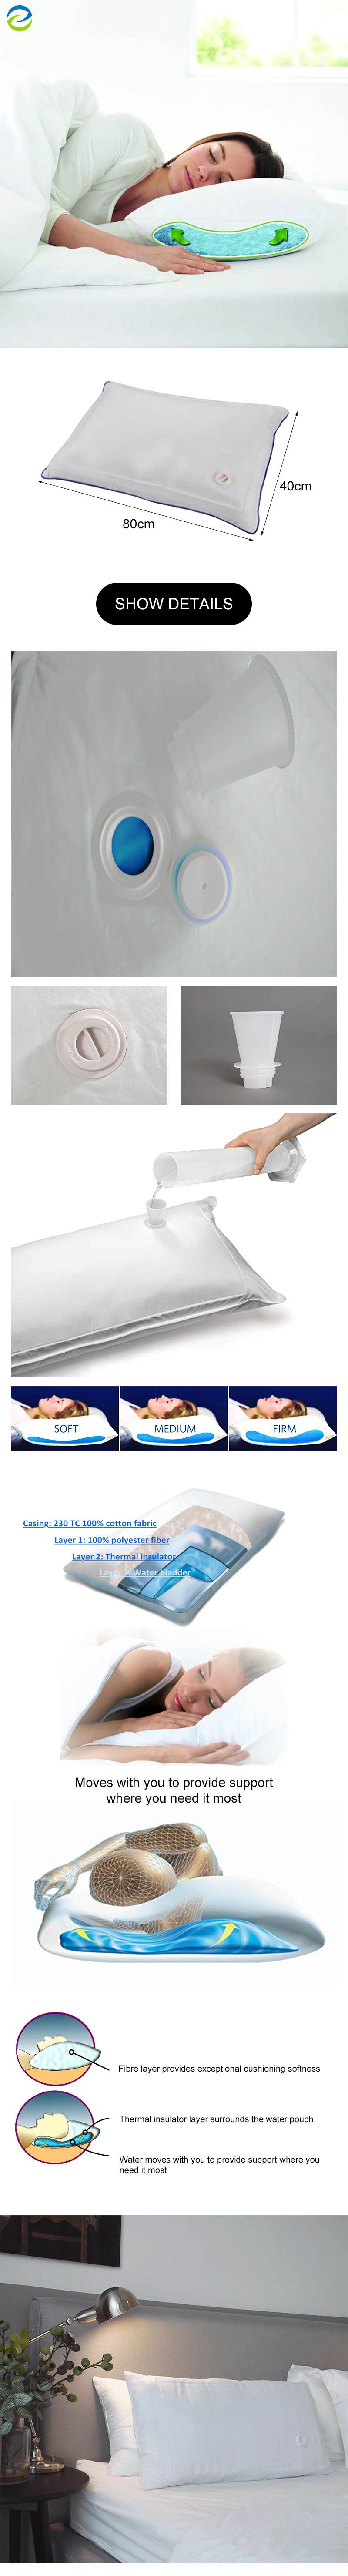 Premium Large Water Sleeping Pillow Adjustable Supportive Water Pillow for bed pillow